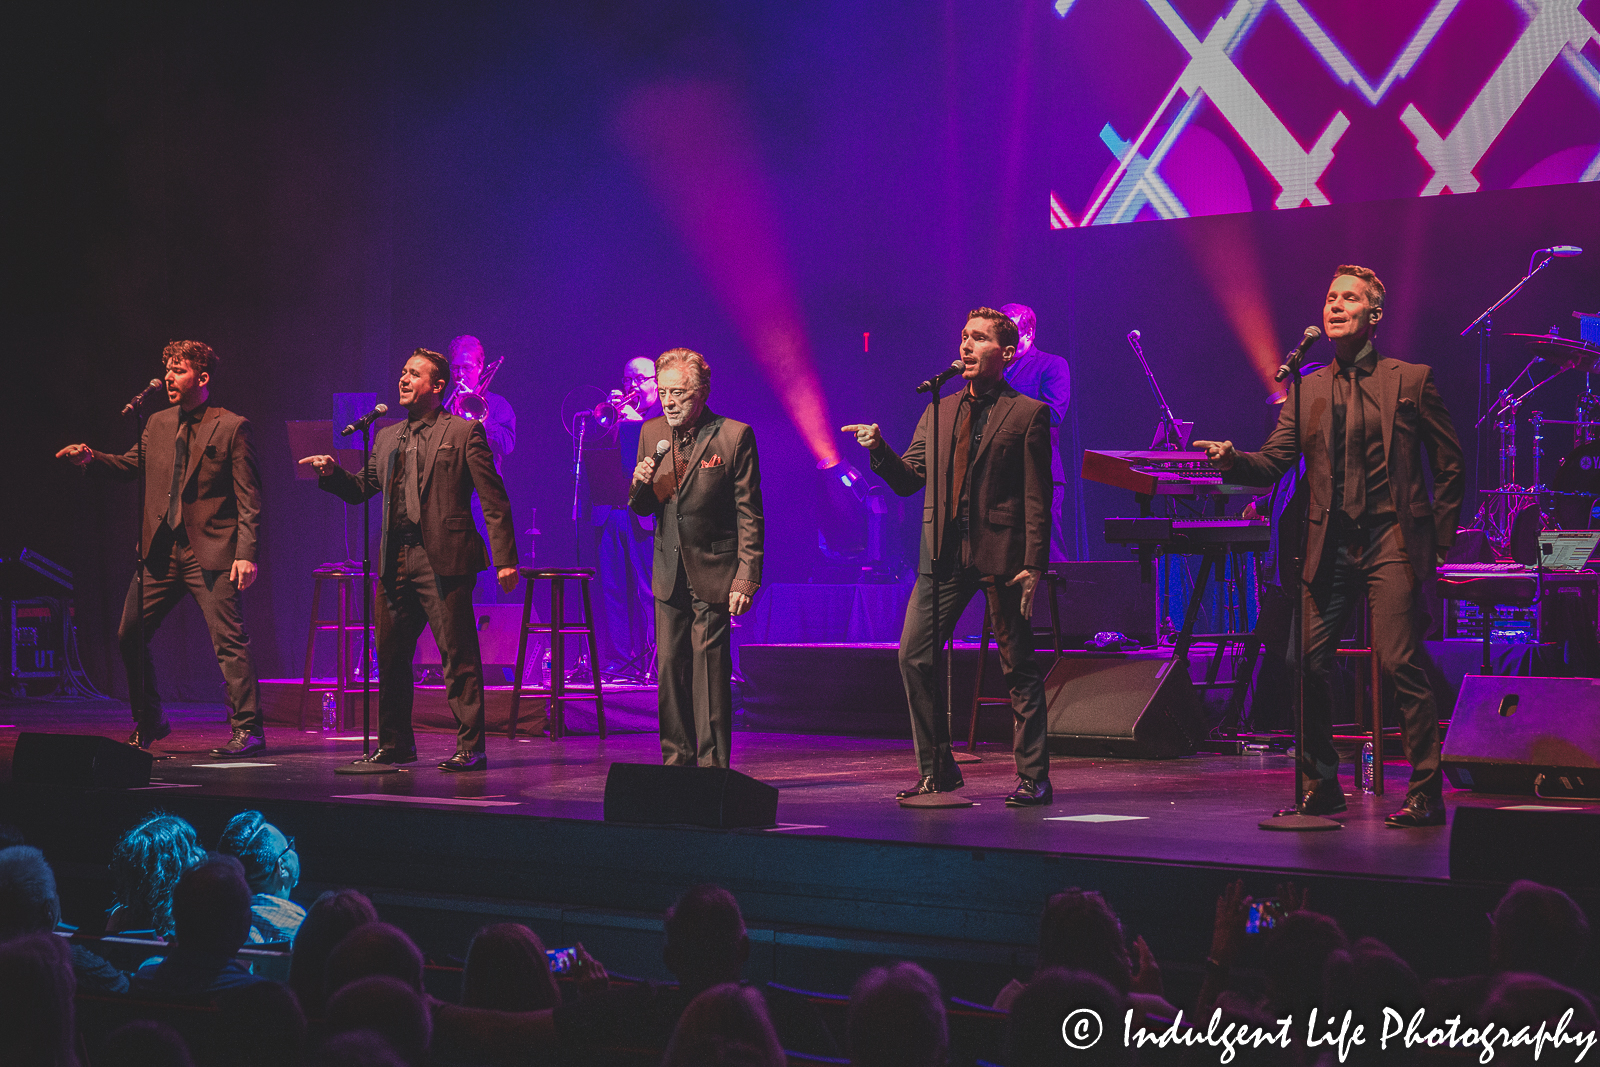 Frankie Valli and the Four Seasons live in concert at Kauffman Center for the Performing Arts in downtown Kansas City, MO on June 4, 2022.